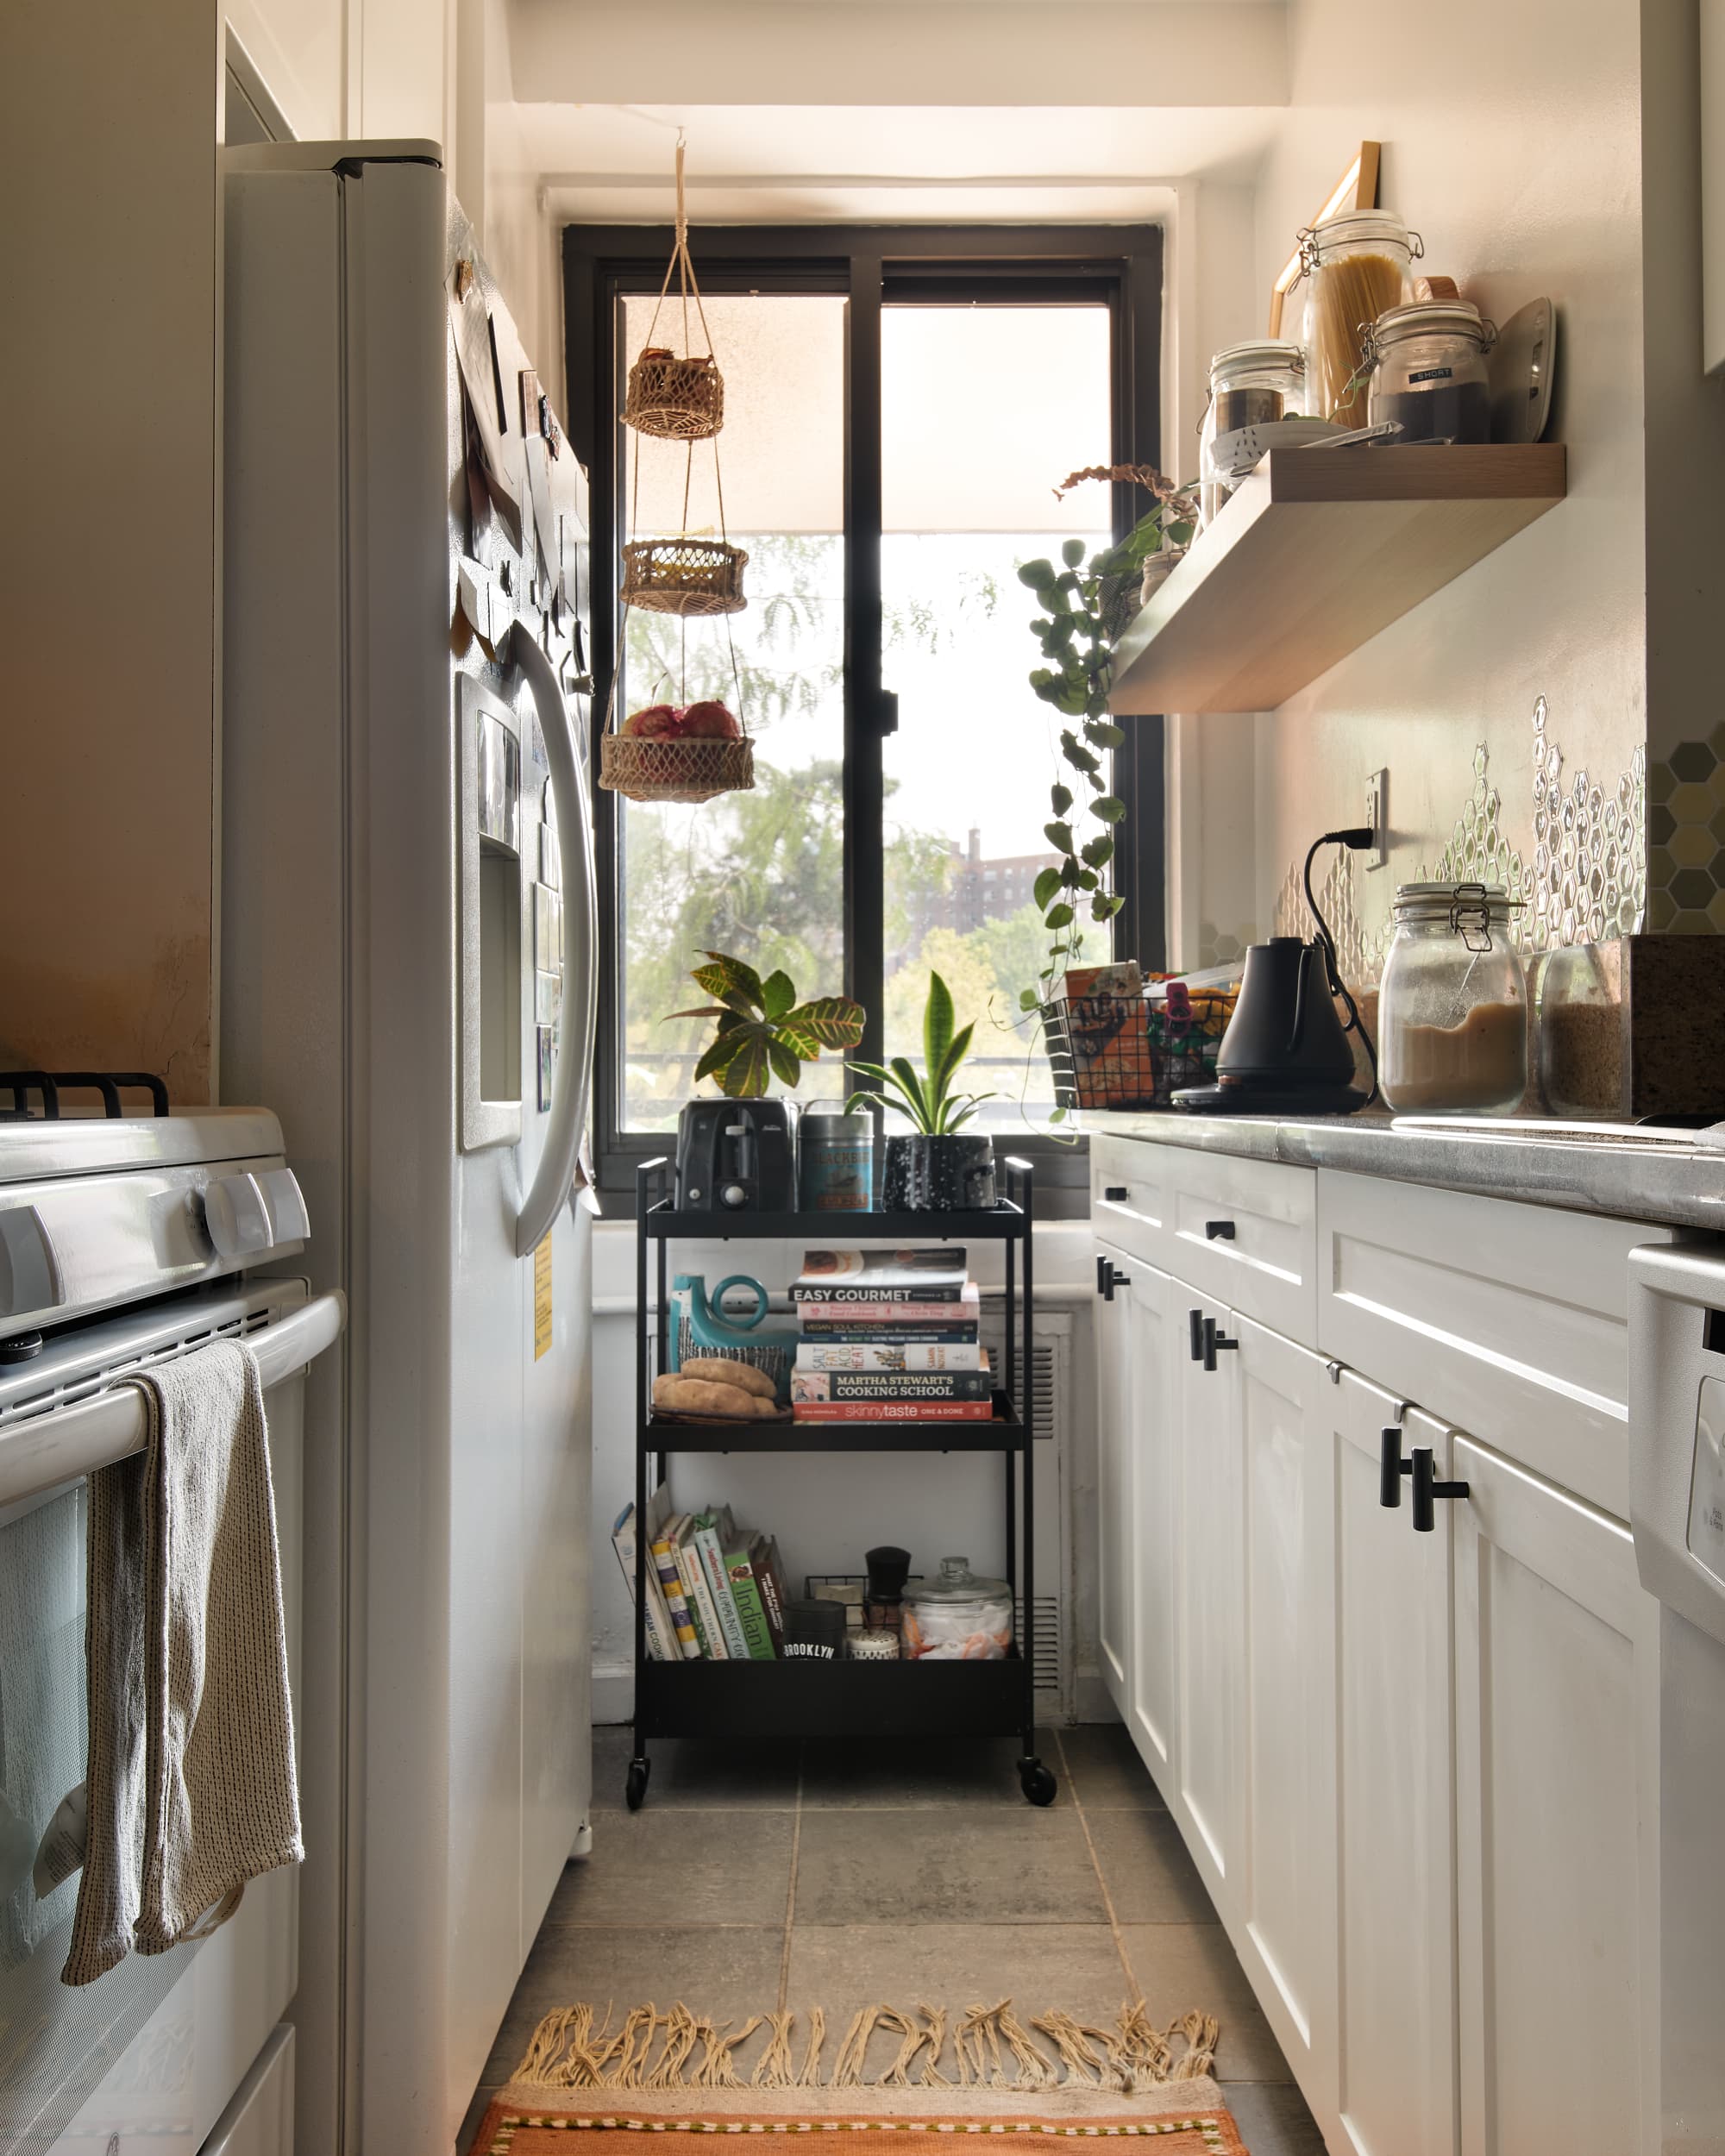 20 Easy Storage Ideas to Steal from this Narrow Kitchen in Harlem ...